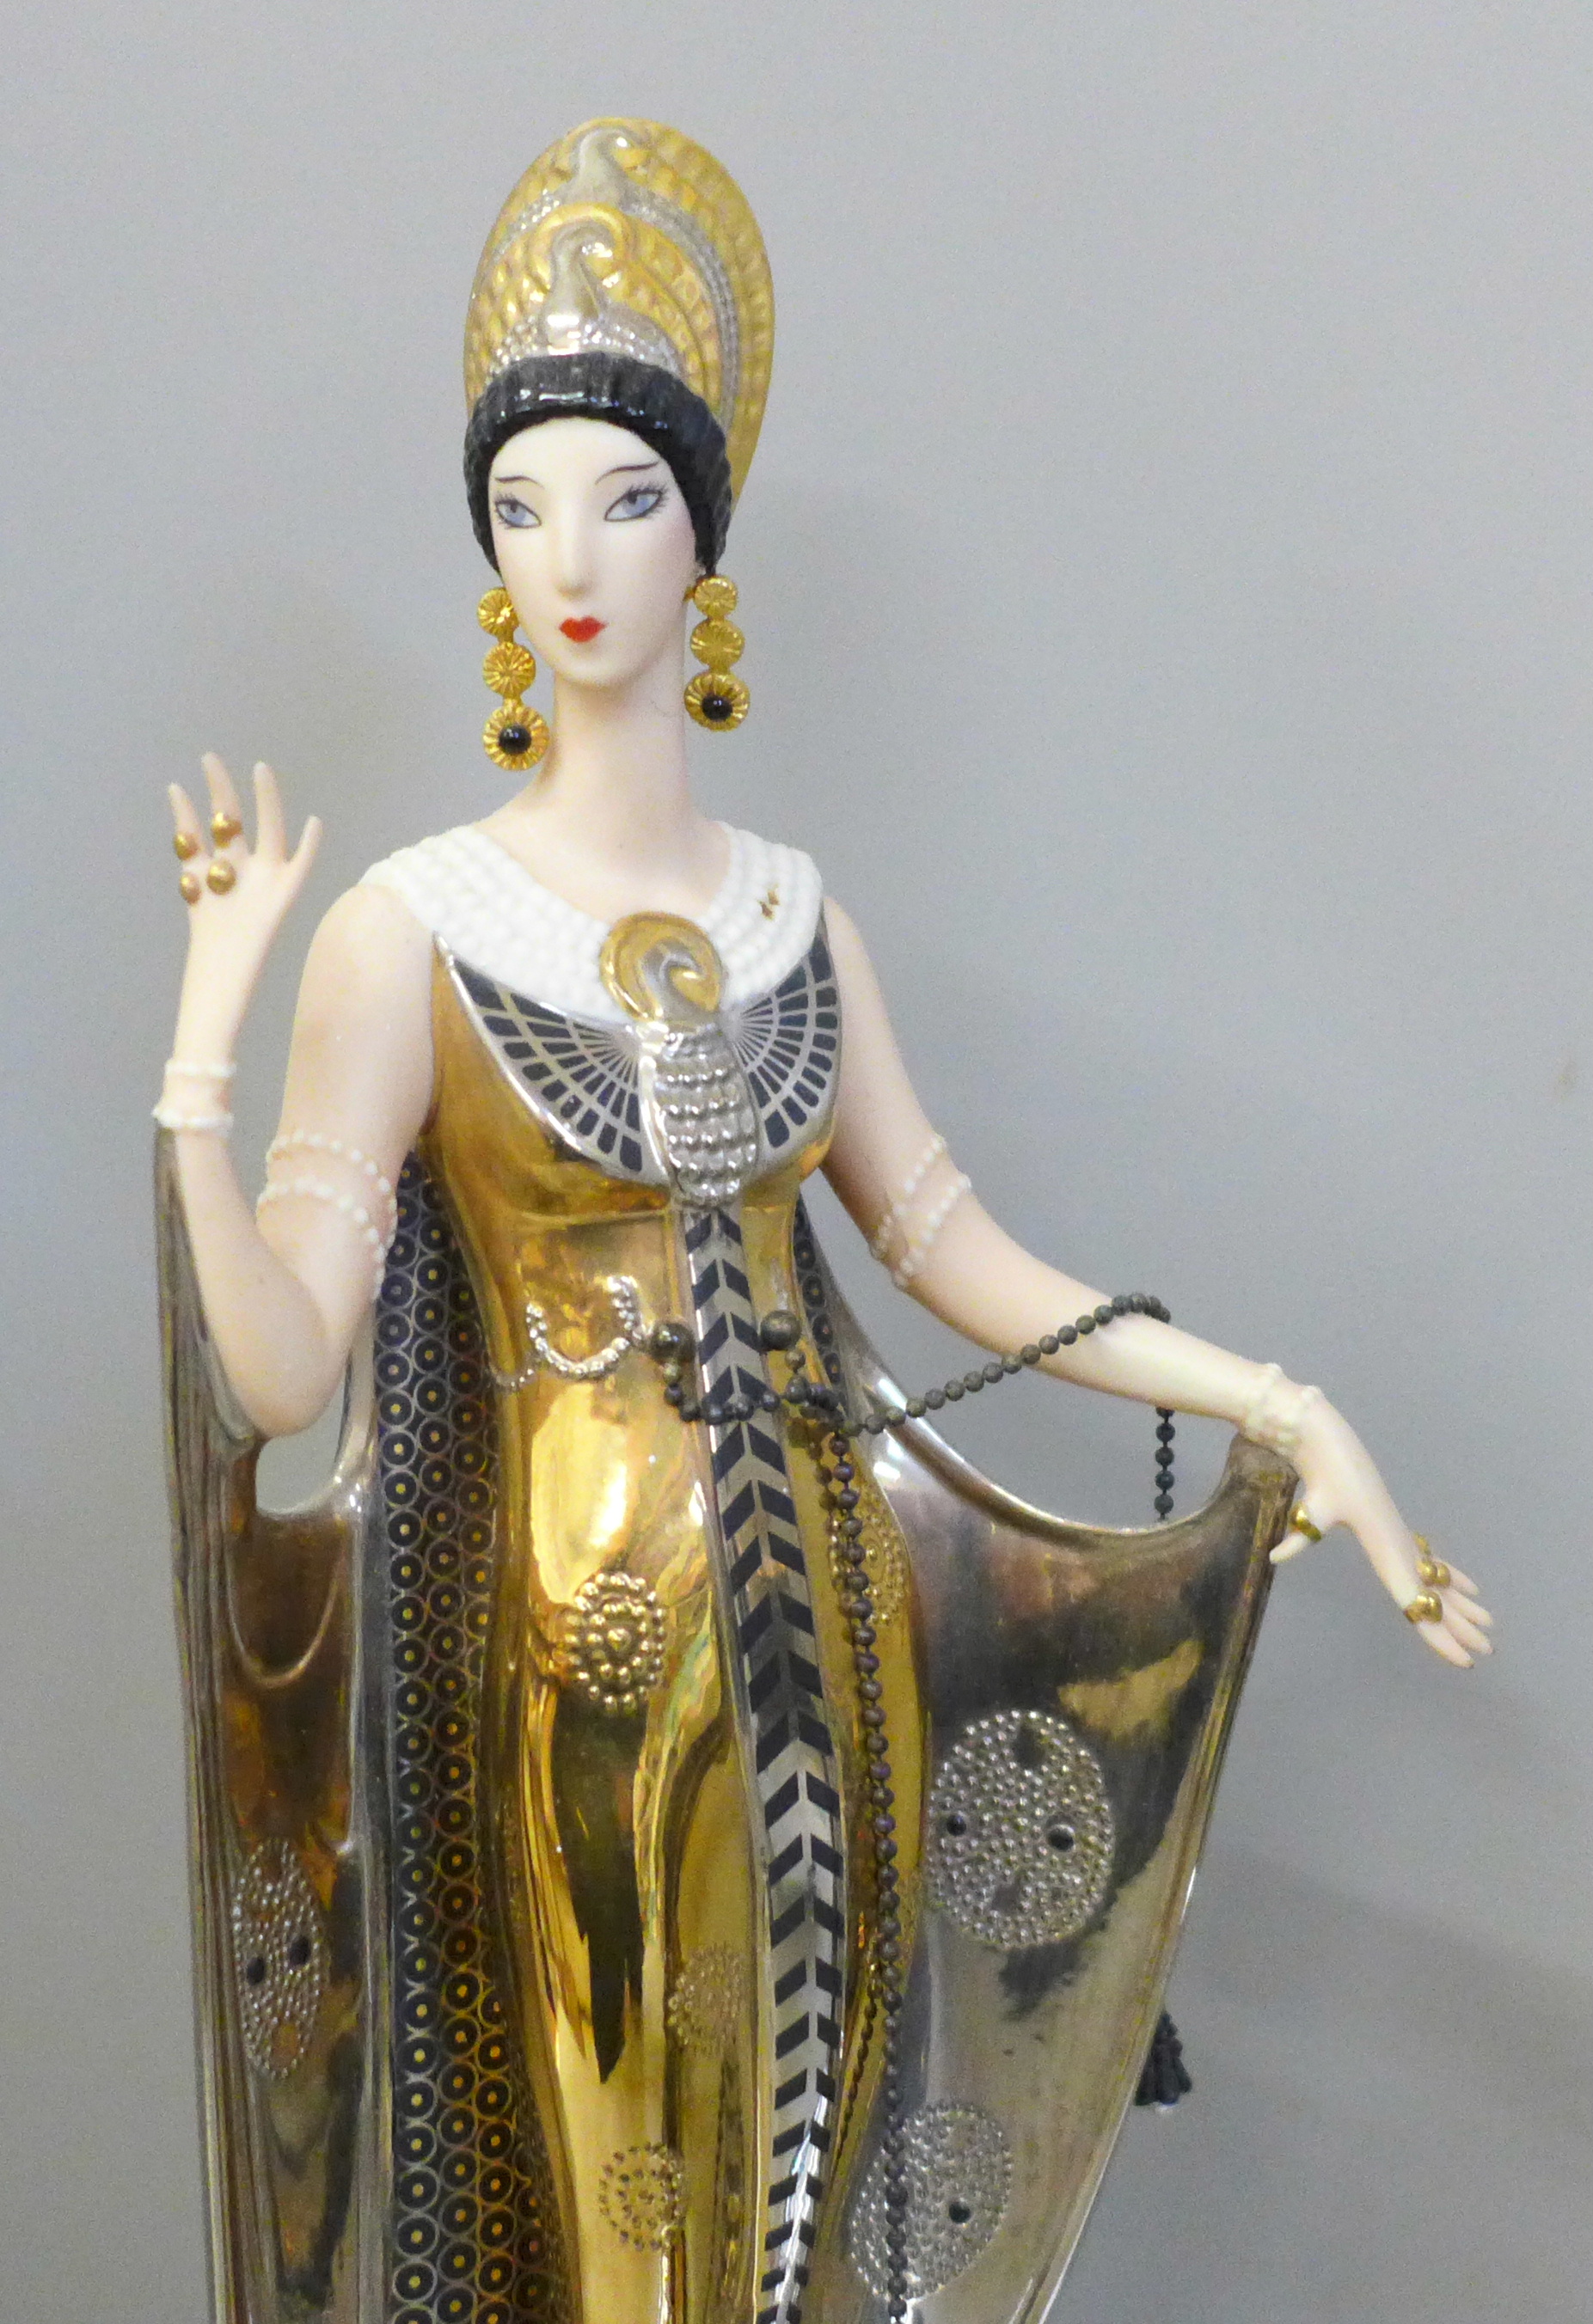 Three House of Erte figures, all limited edition, Isis, Symphone in Black and Leopard - Image 2 of 7